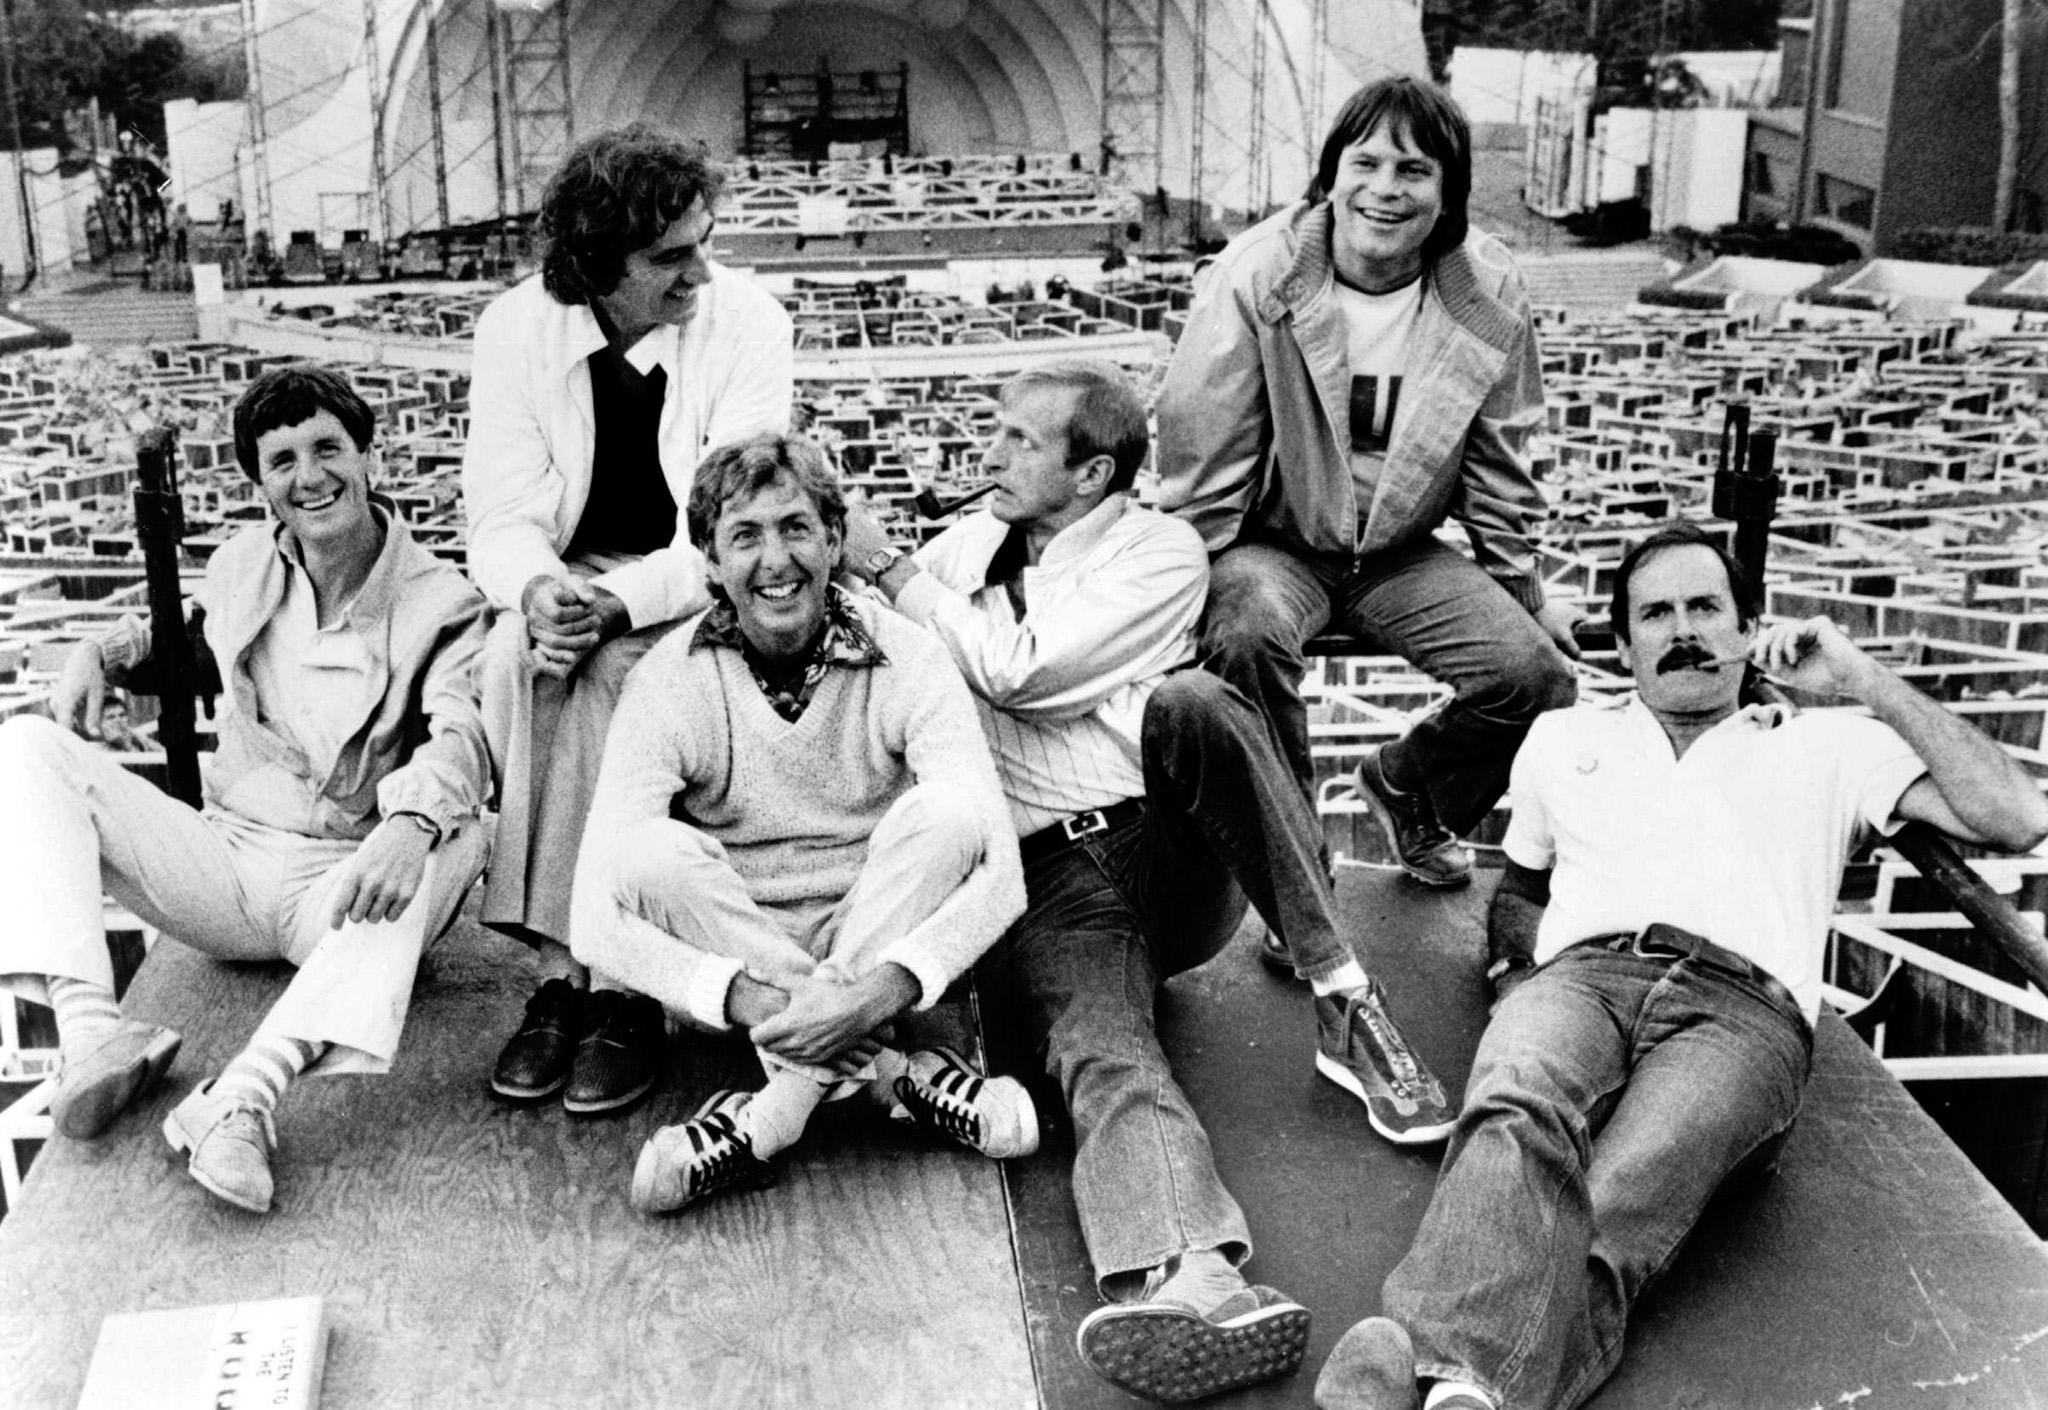 From left to right: Michael Palin, Terry Jones, Eric Idle, Graham Chapman, Terry Gilliam and John Cleese in 1982